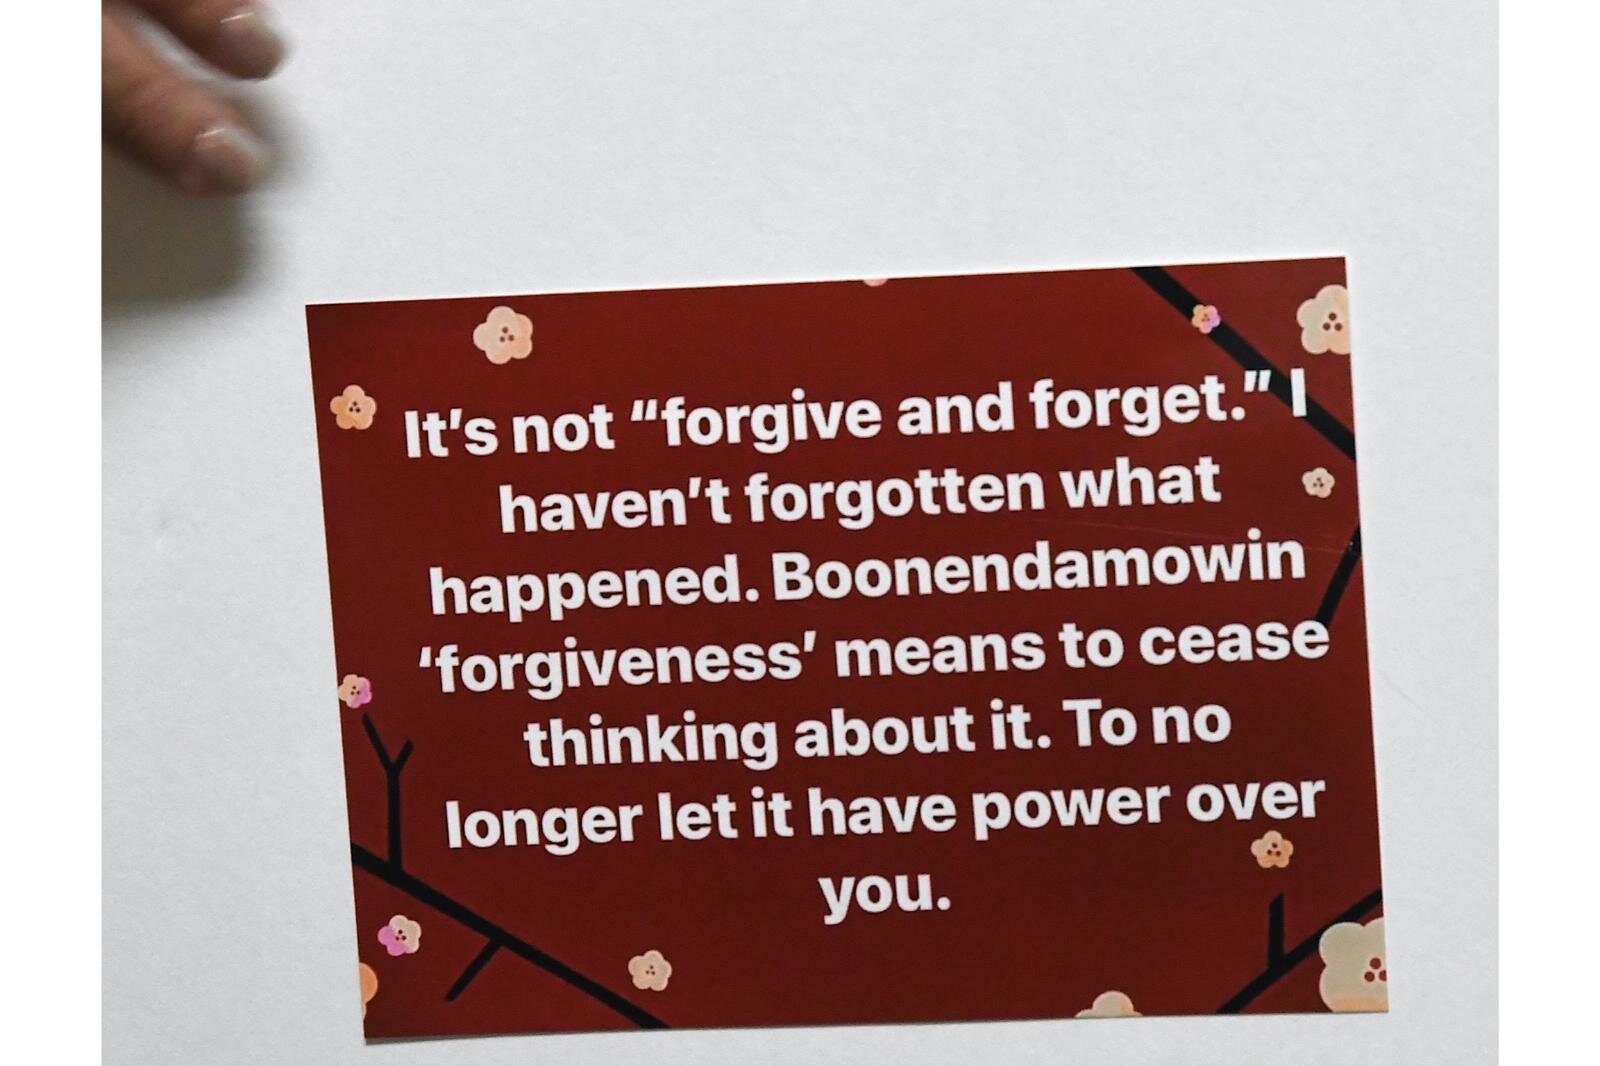 A poster about forgetting and forgiveness